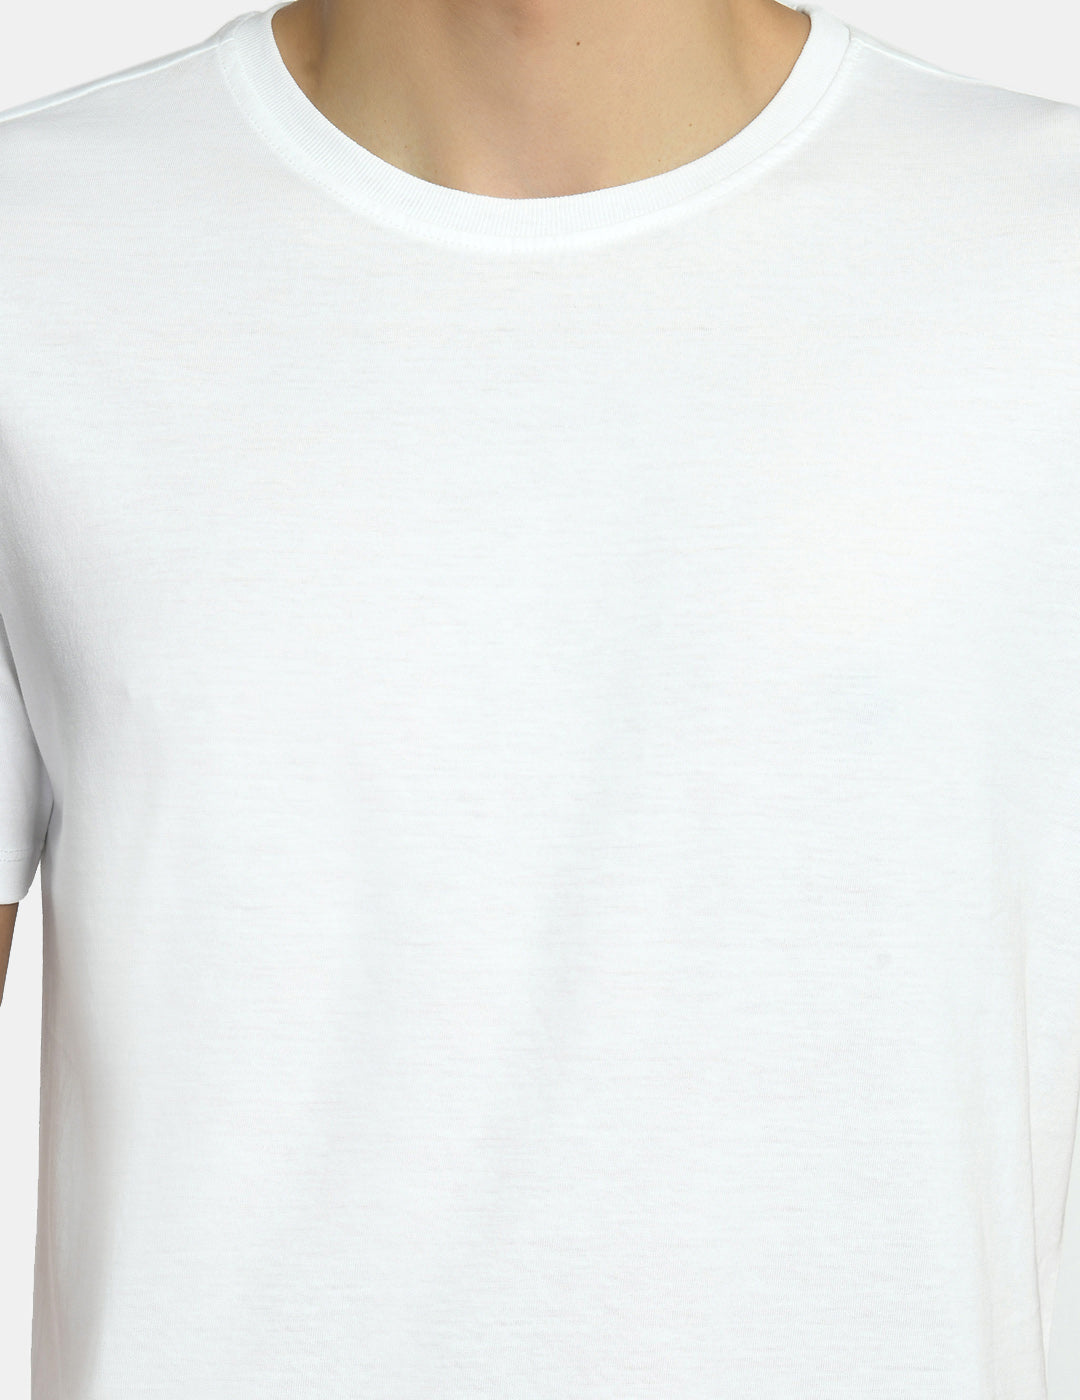 Men's Casual Pearl White Round Neck T-Shirt